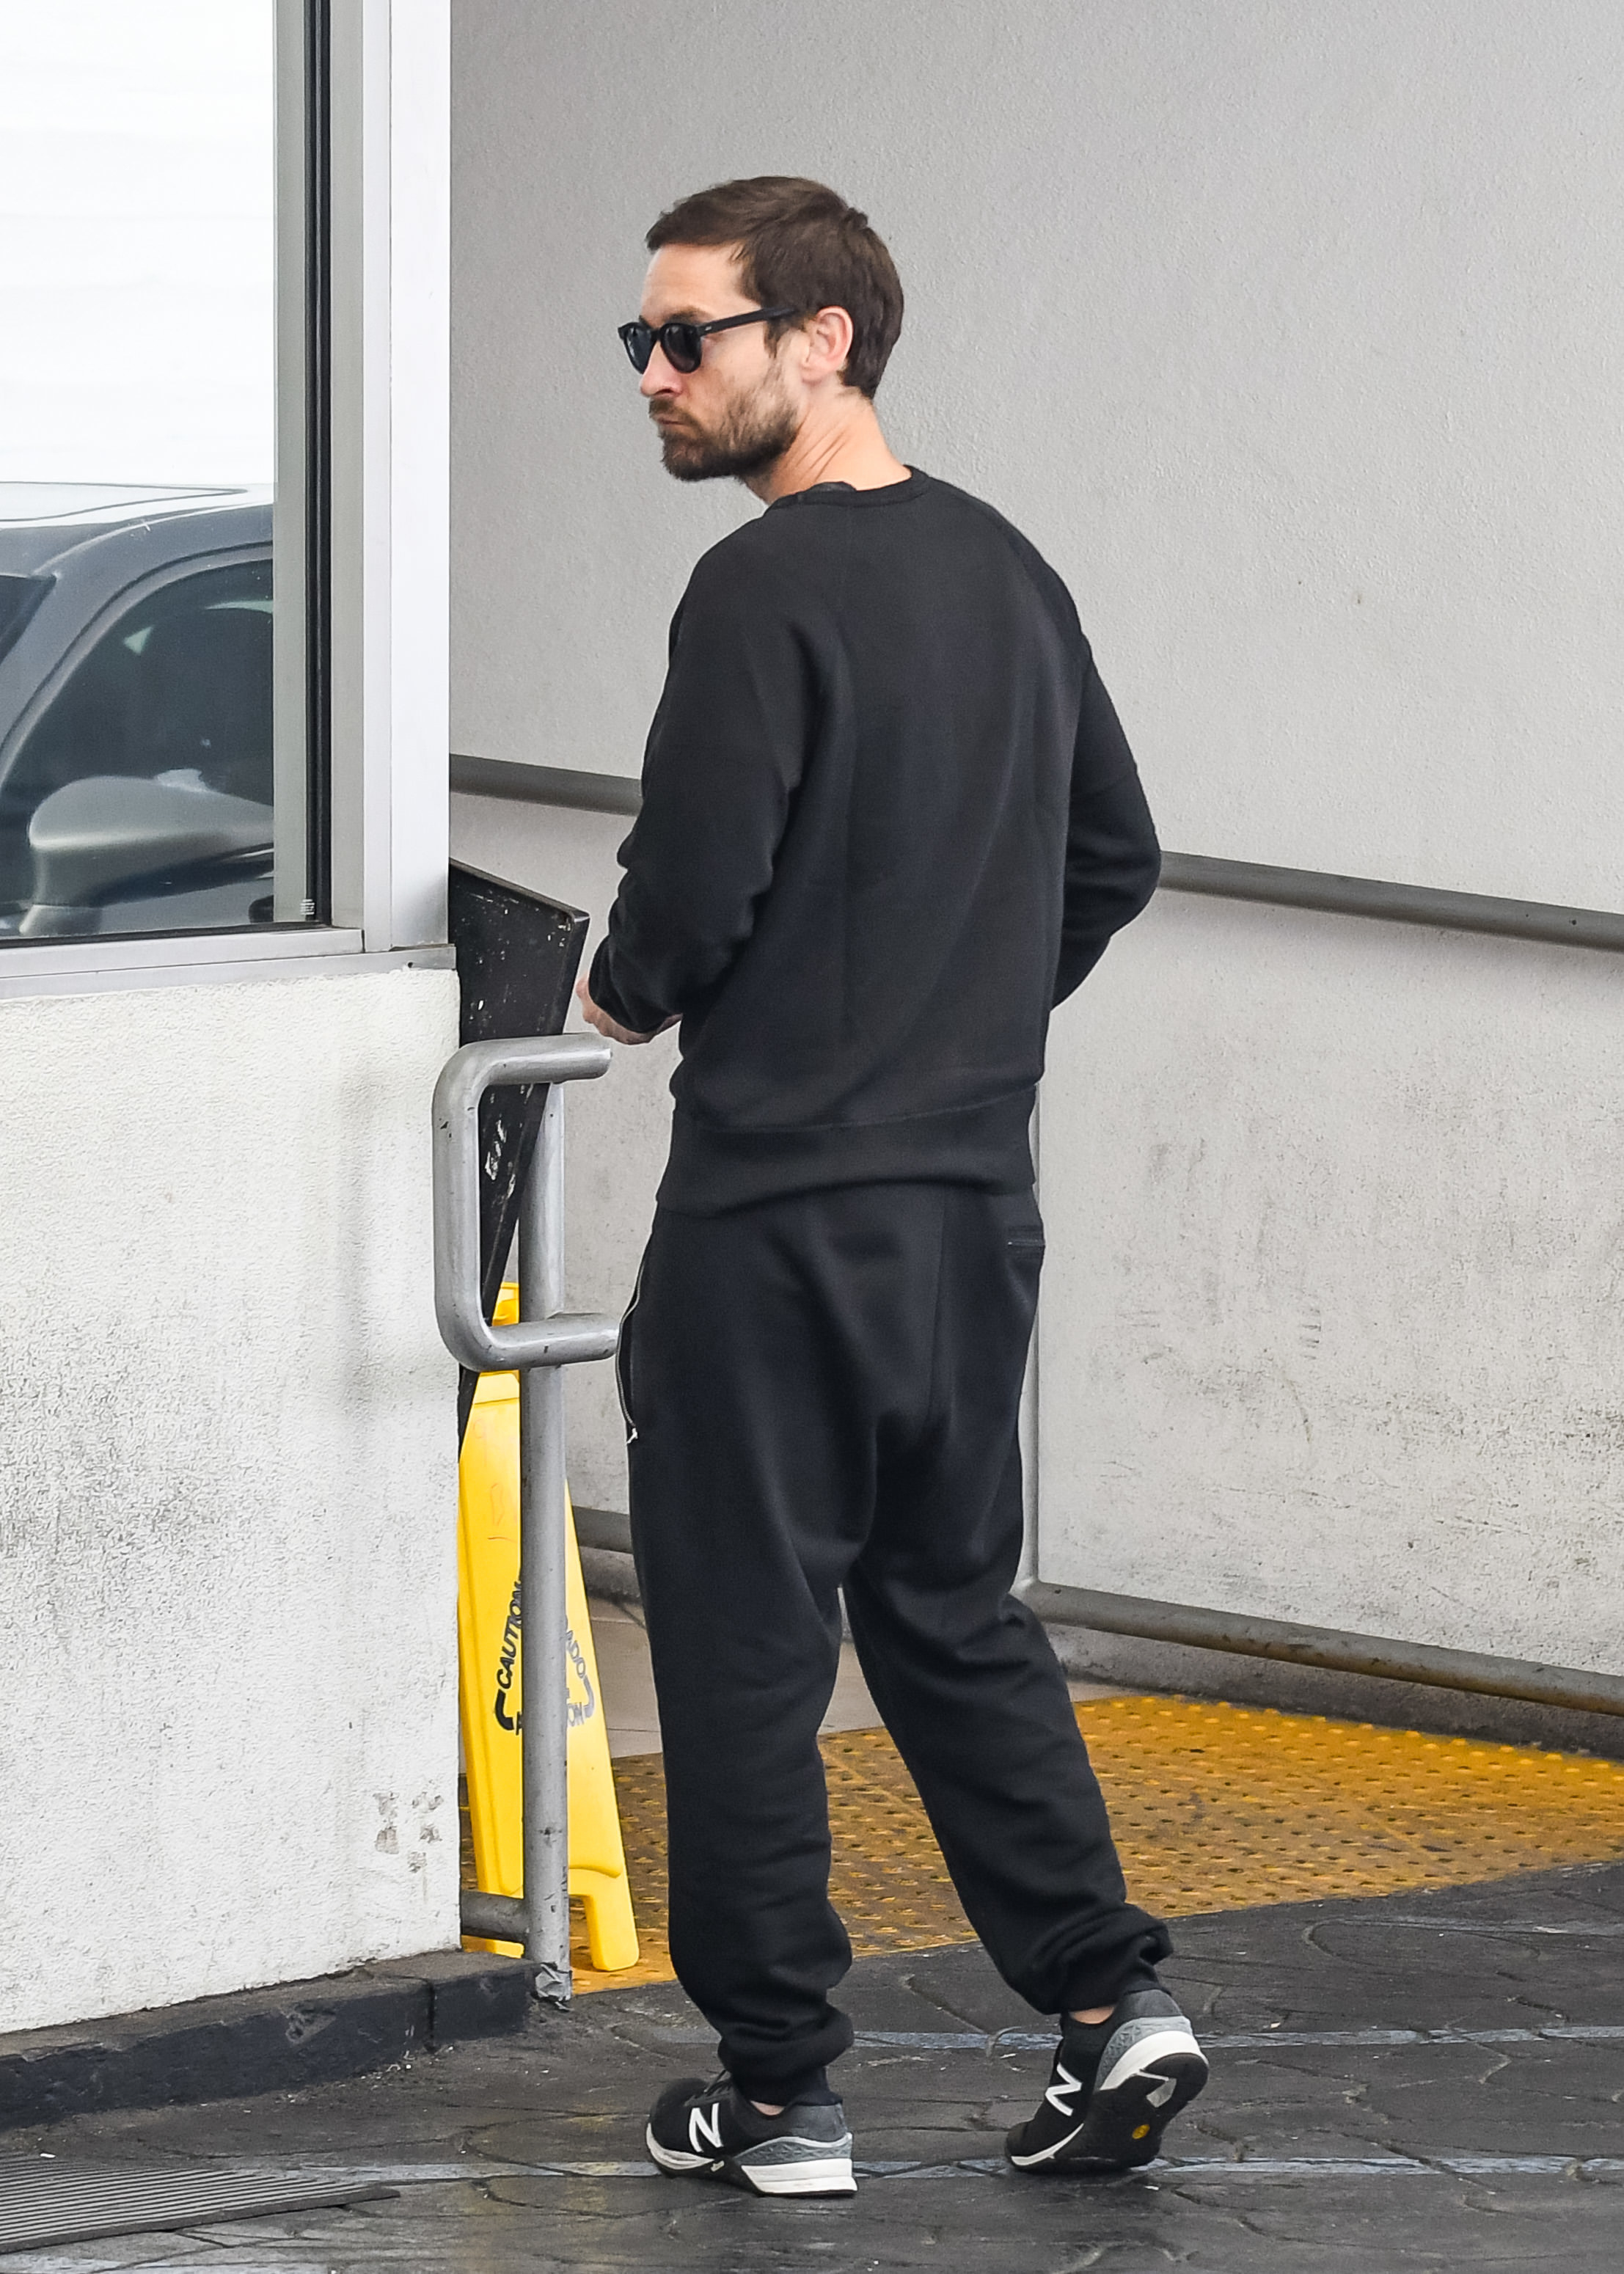 Tobey in sunglasses, a sweatsuit, and sneakers